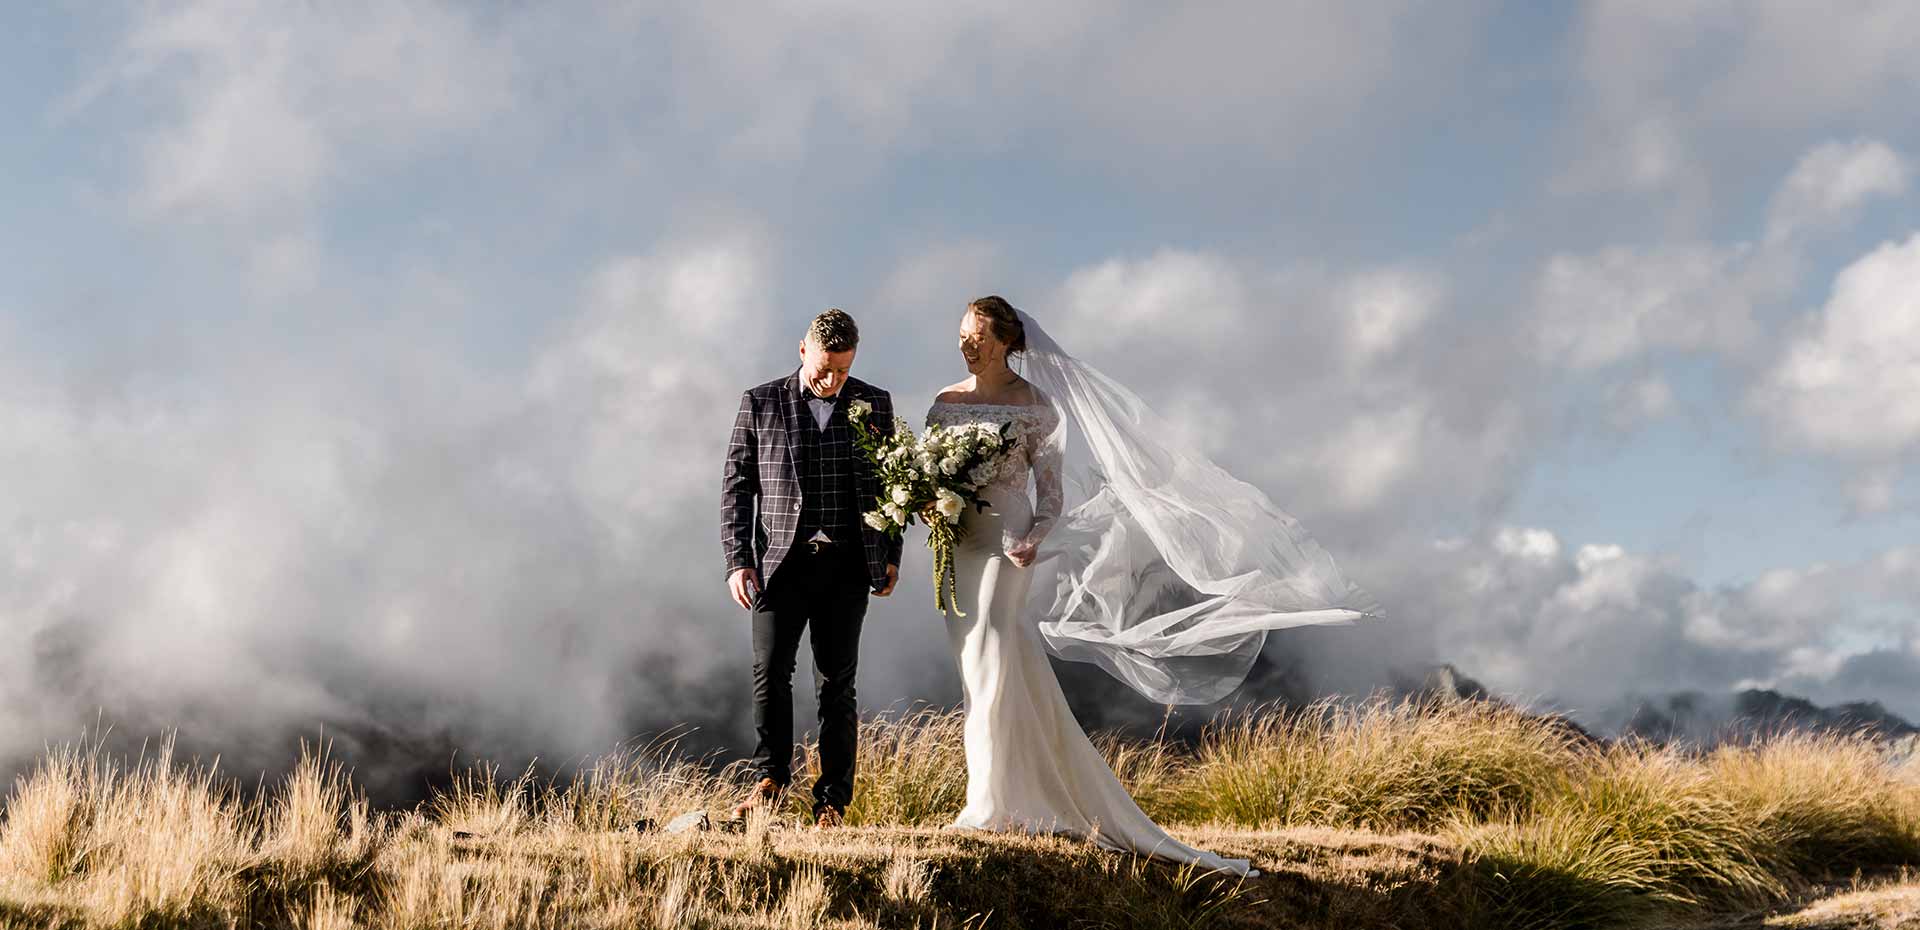 Alpine Heli elopement packages.  Photo by Susan Miller Photography